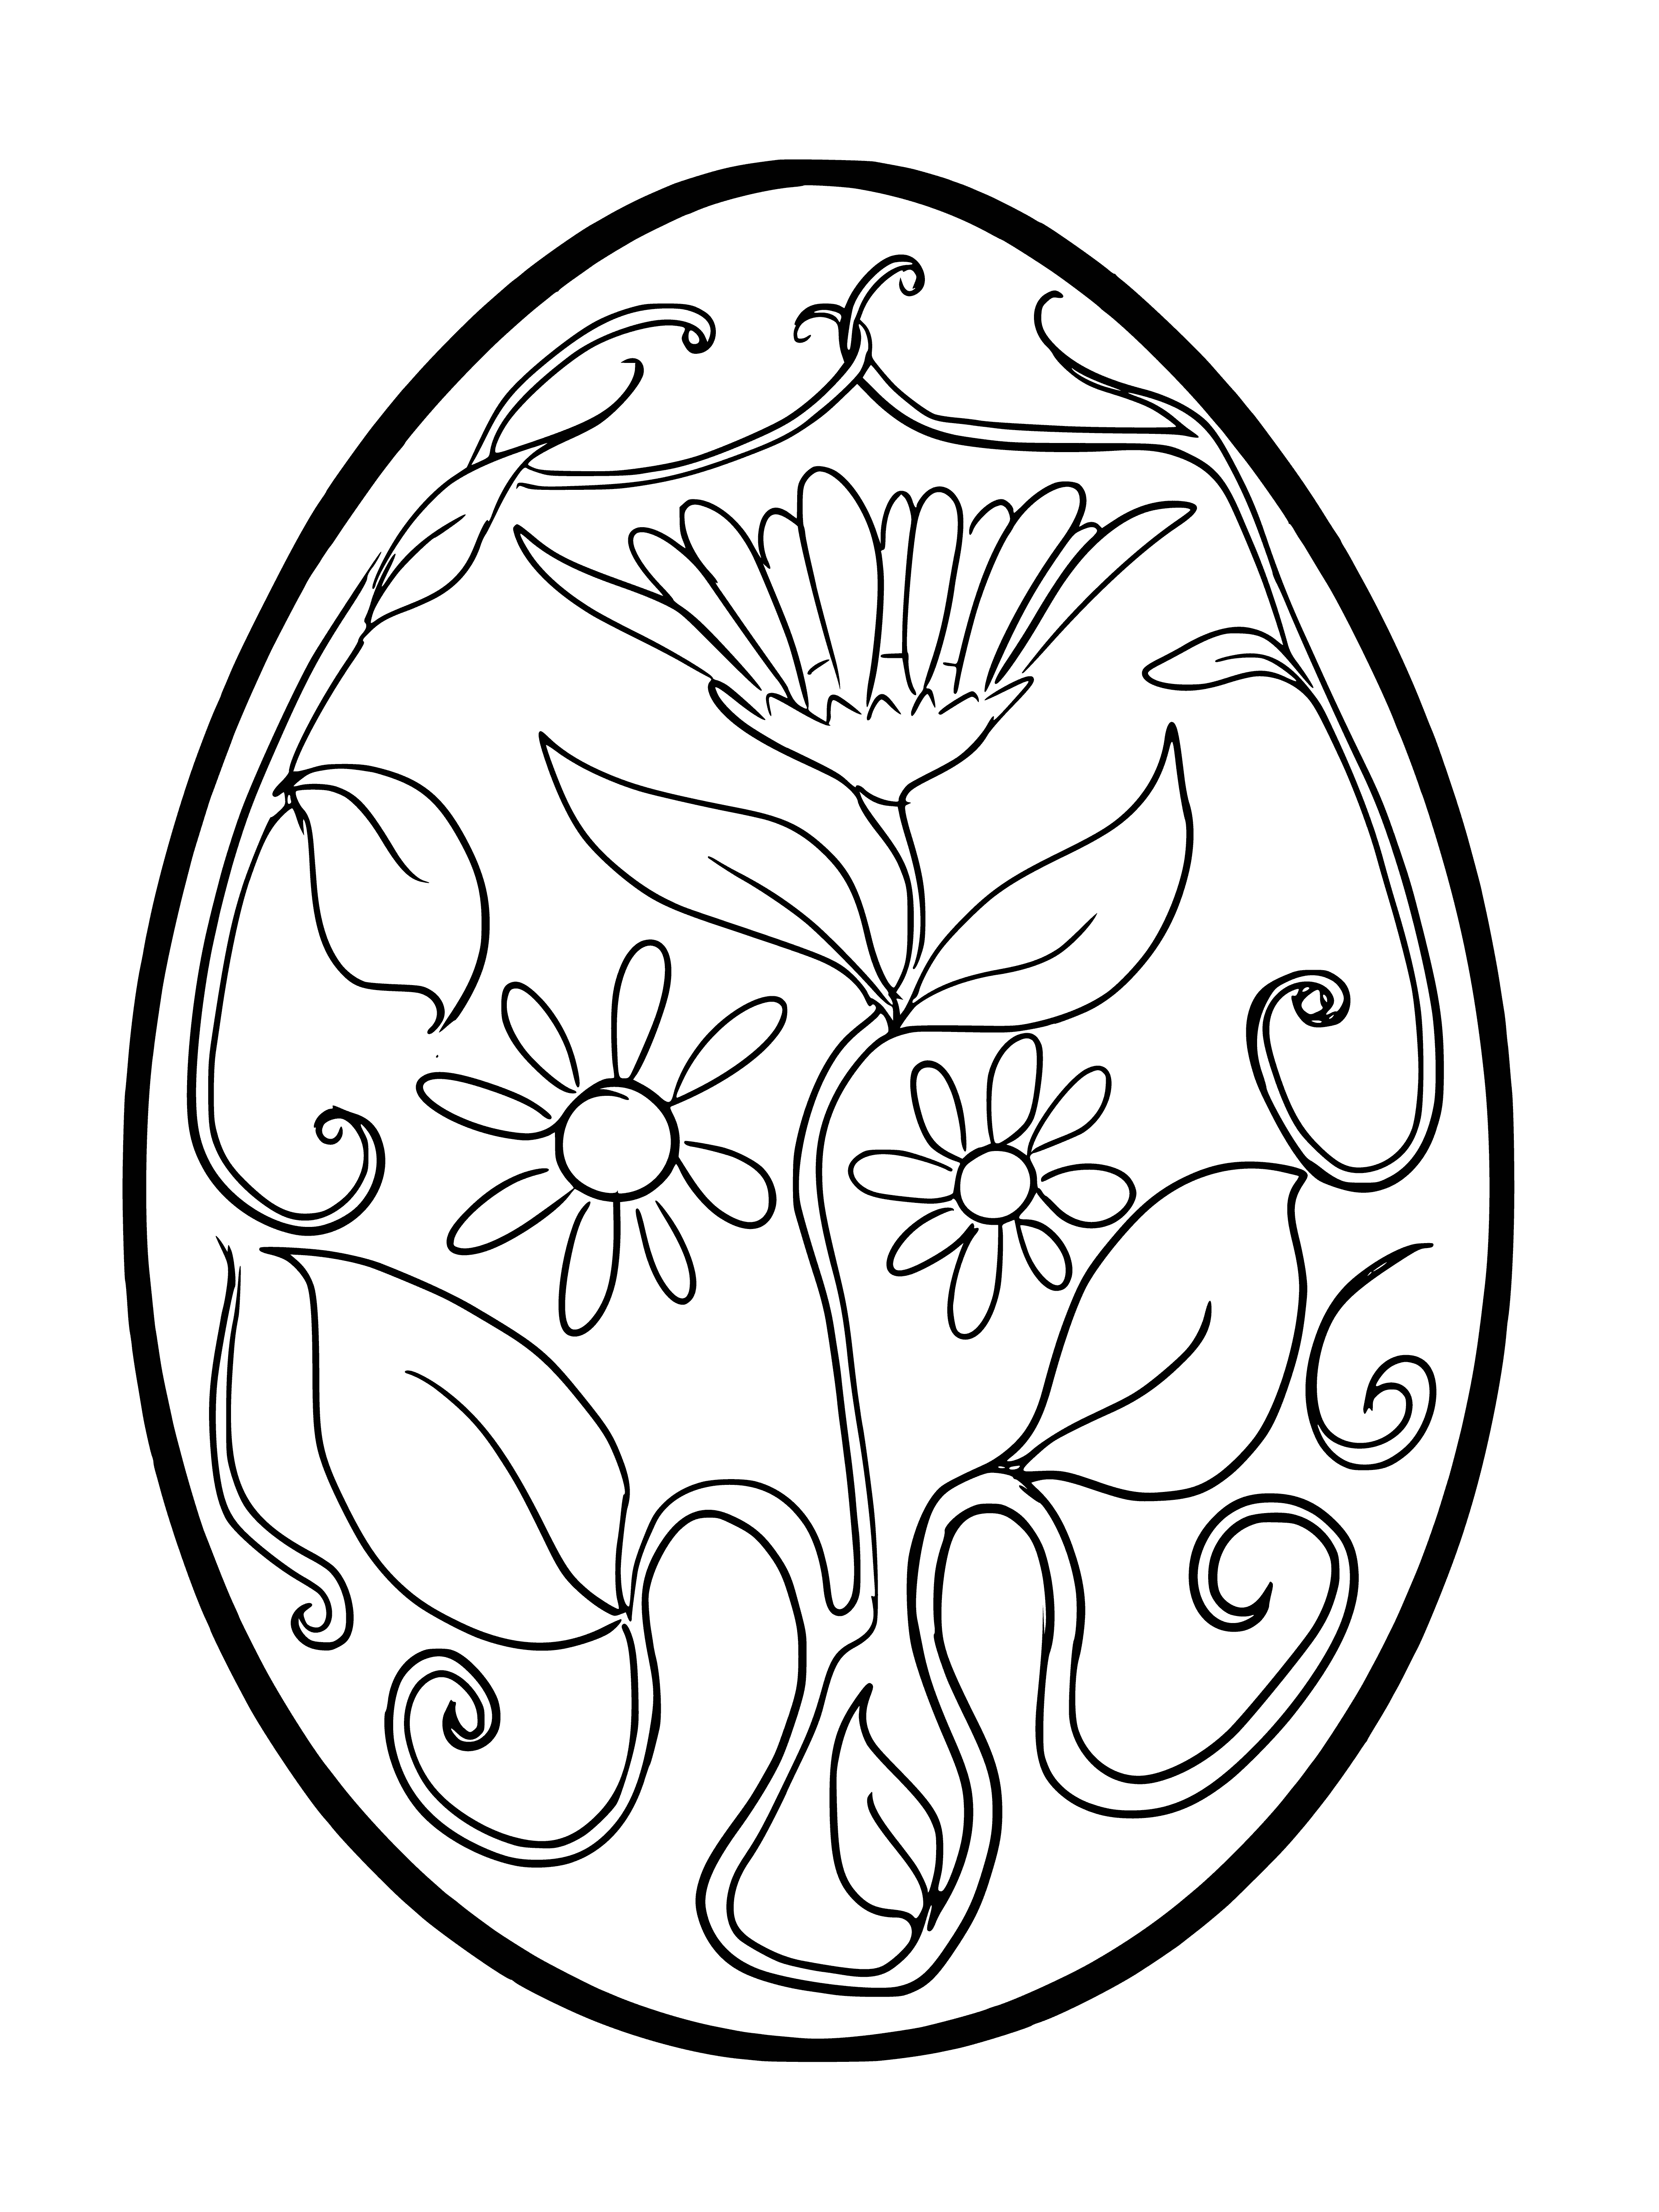 coloring page: 3 Easter eggs of diff. sizes - 2 brown & 1 white - next to each other on the grass.